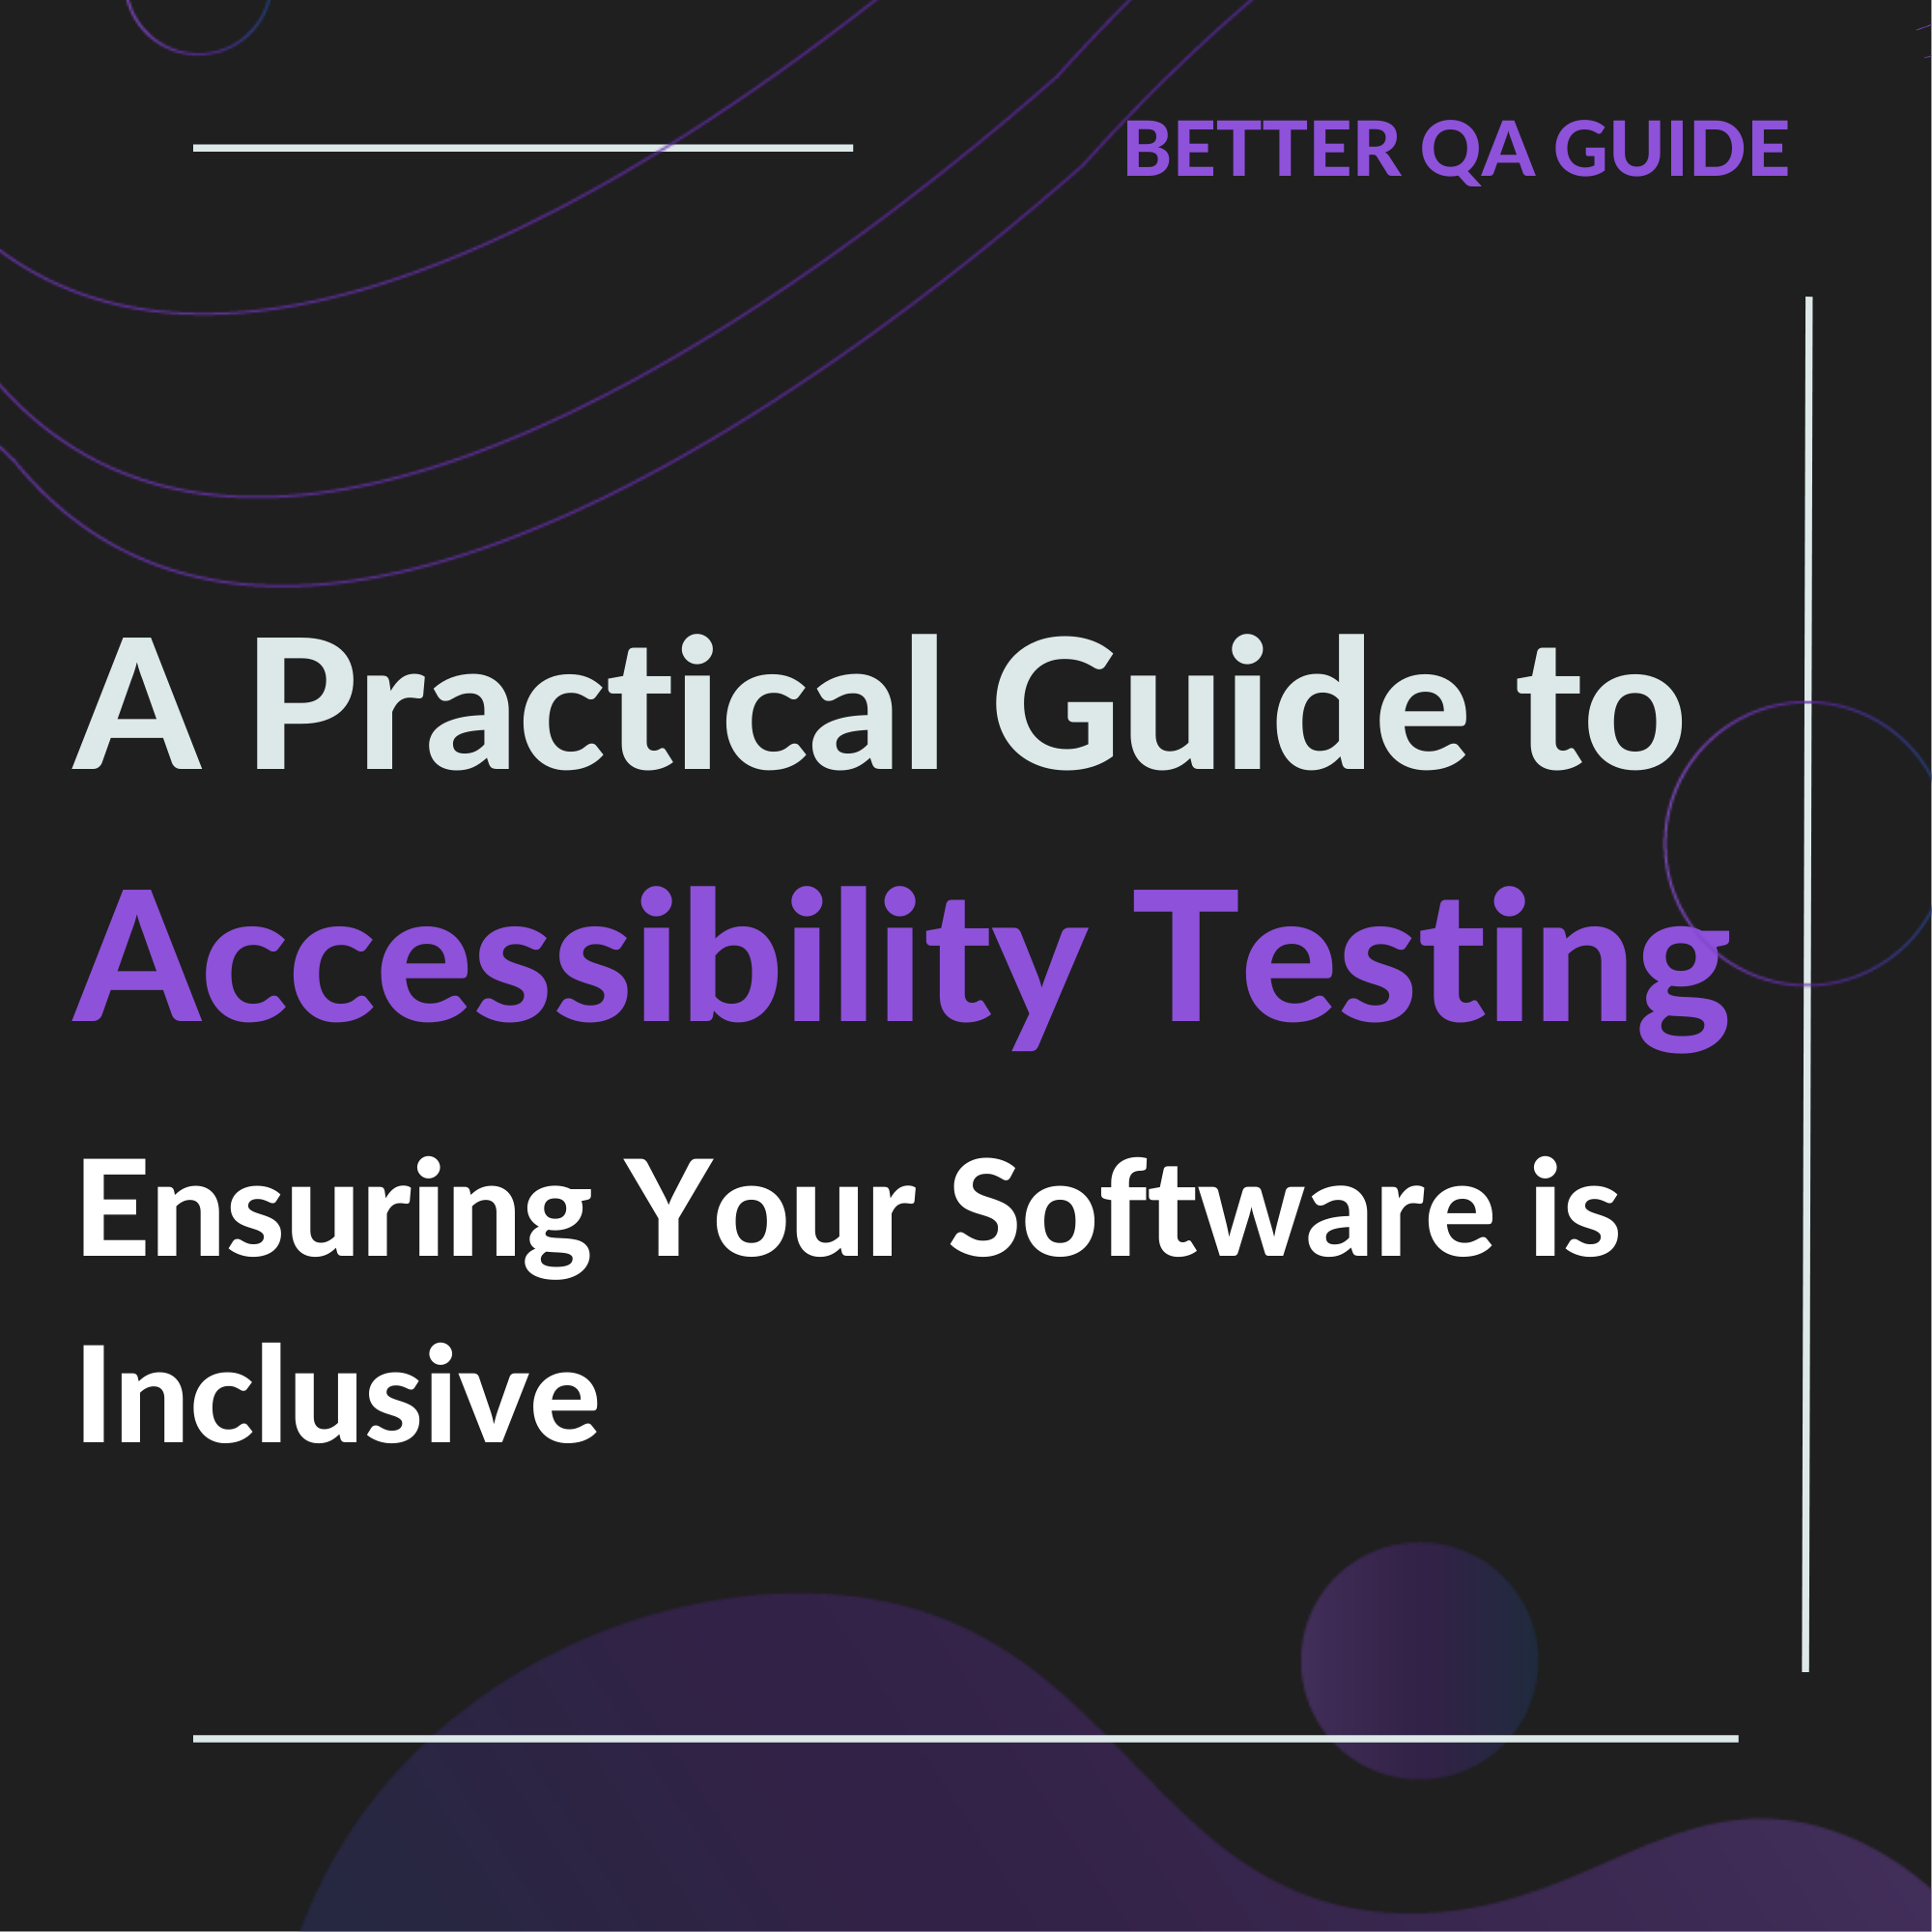 A Practical Guide to Accessibility Testing Ensuring Your Software is Inclusive